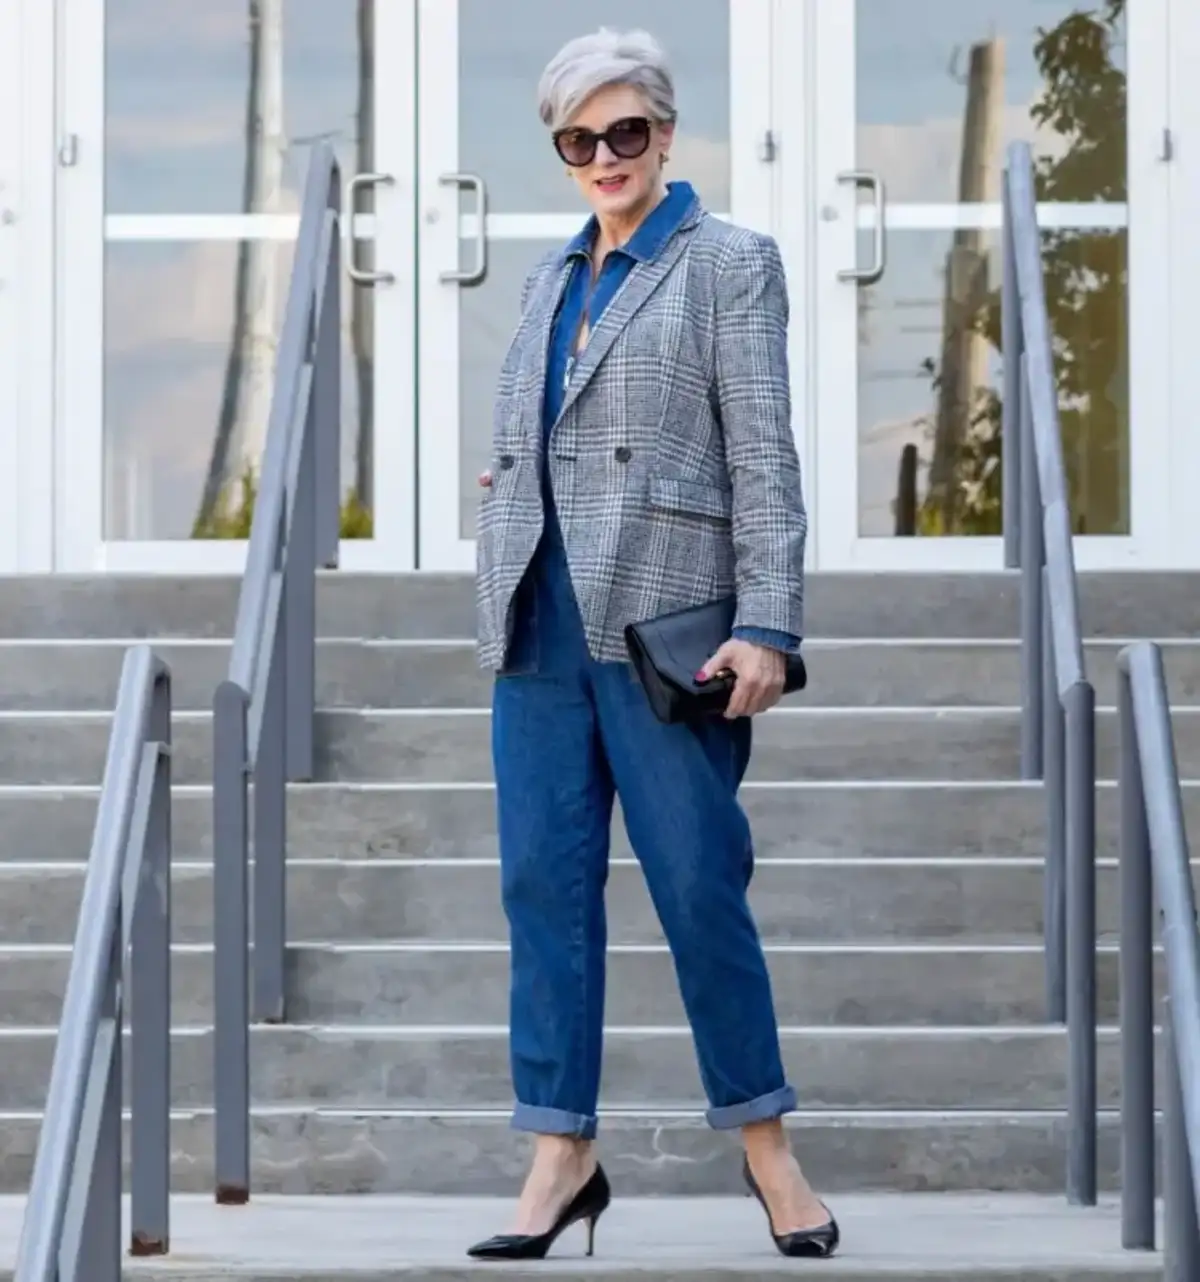 Rock Your Denim: 5 Stylish Outfit Ideas For 60 Year Old Women